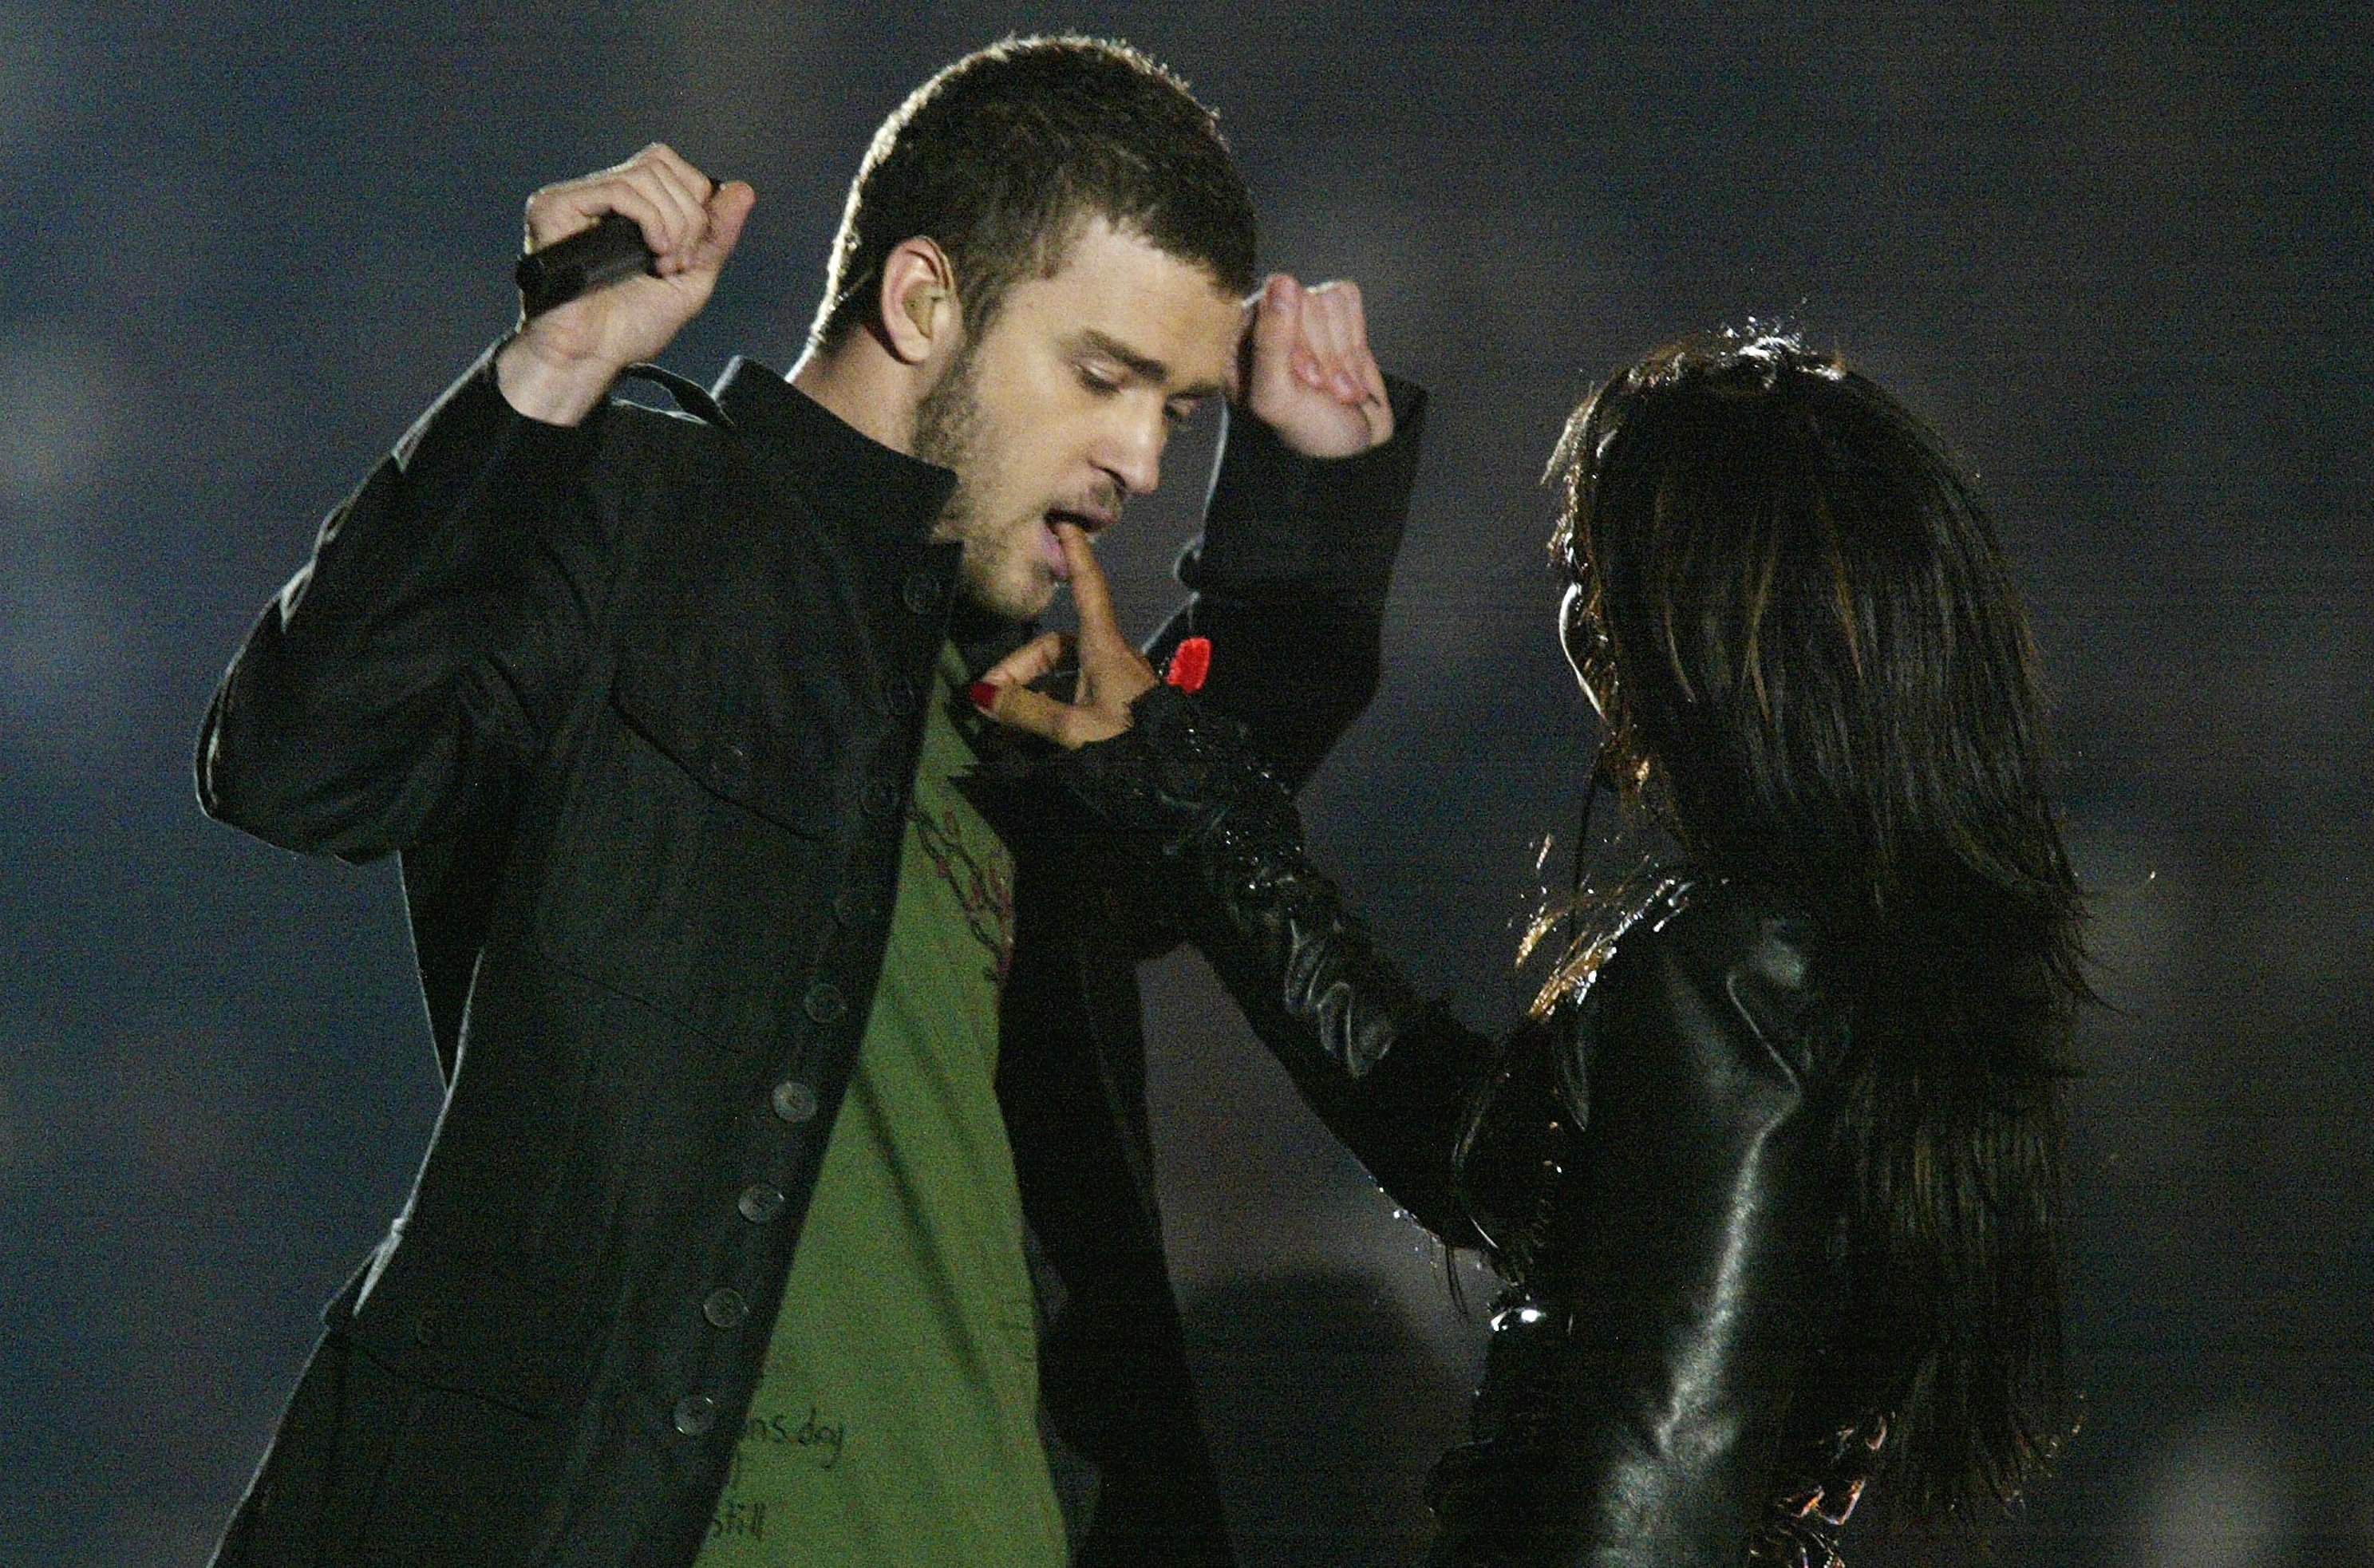 Janet Jackson and Justin Timberlakes Super Bowl incident 